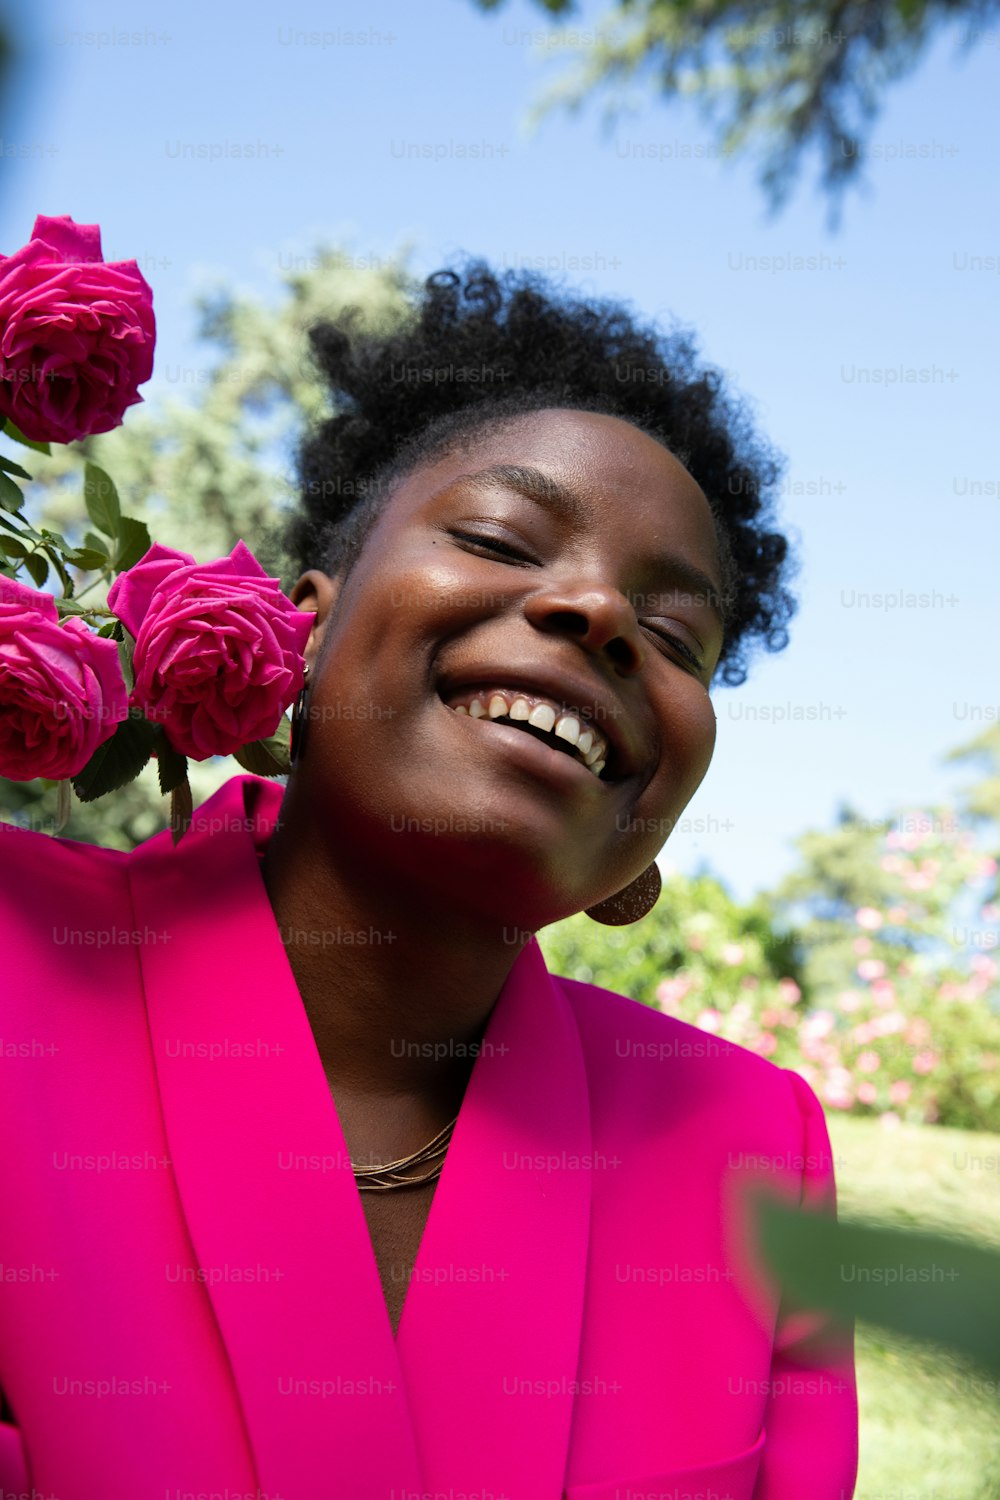 a woman in a bright pink suit smiles at the camera